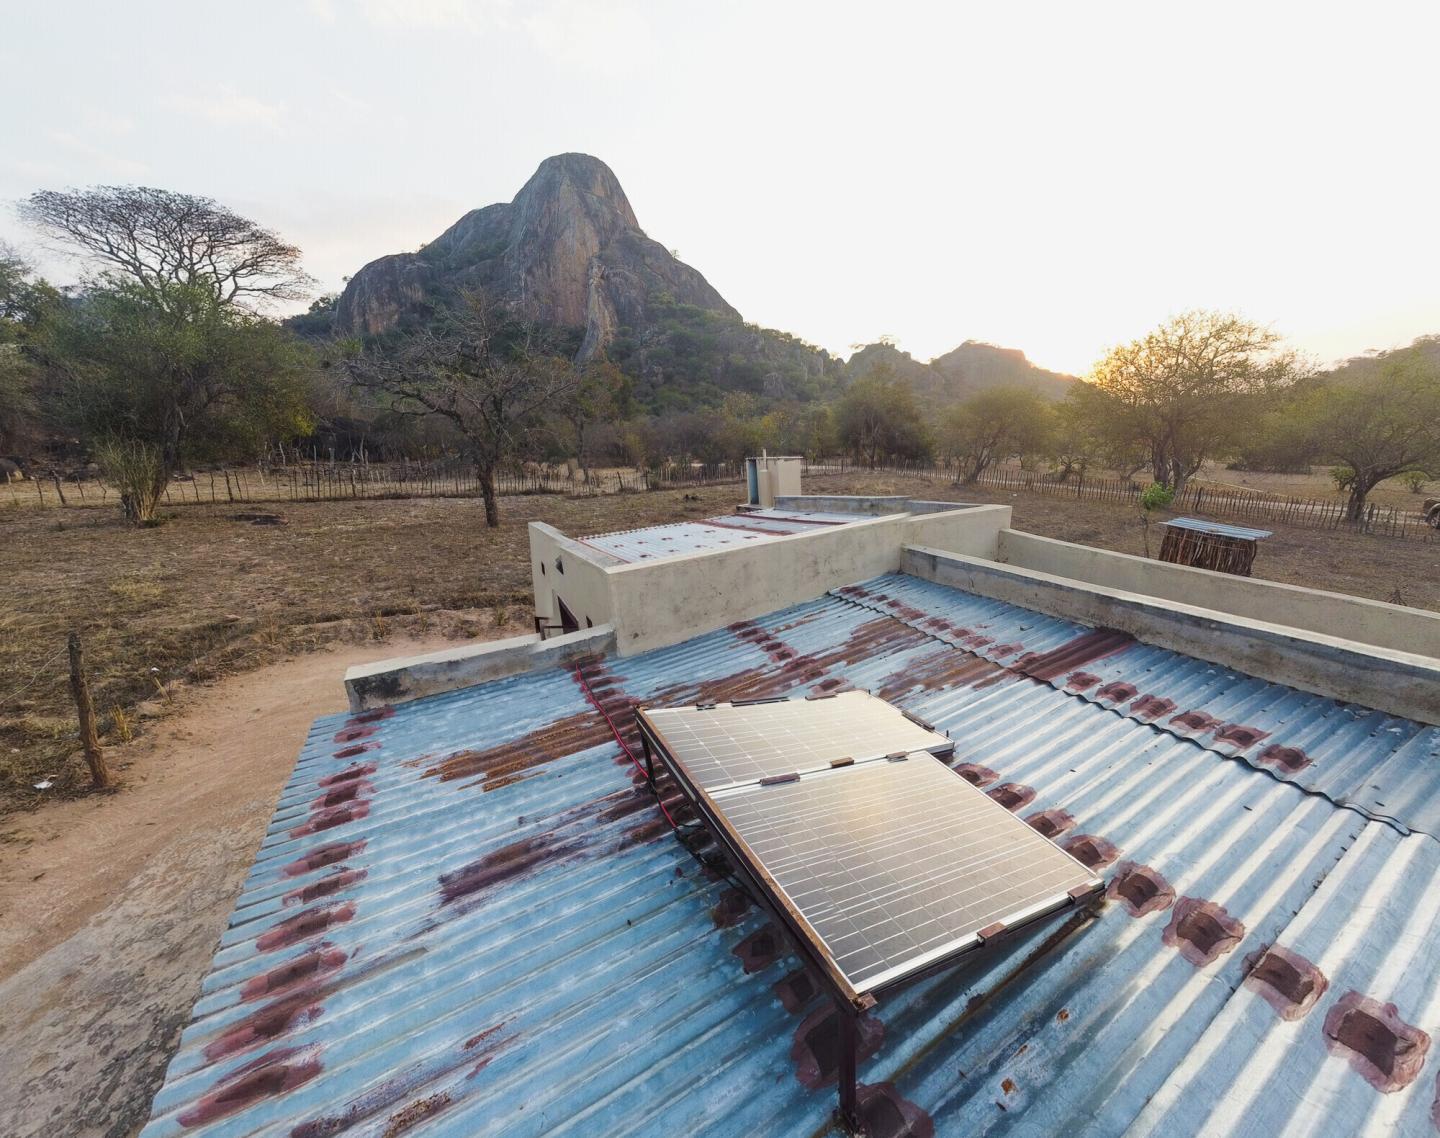 Solar panels on a rooftop in Zimbabwe